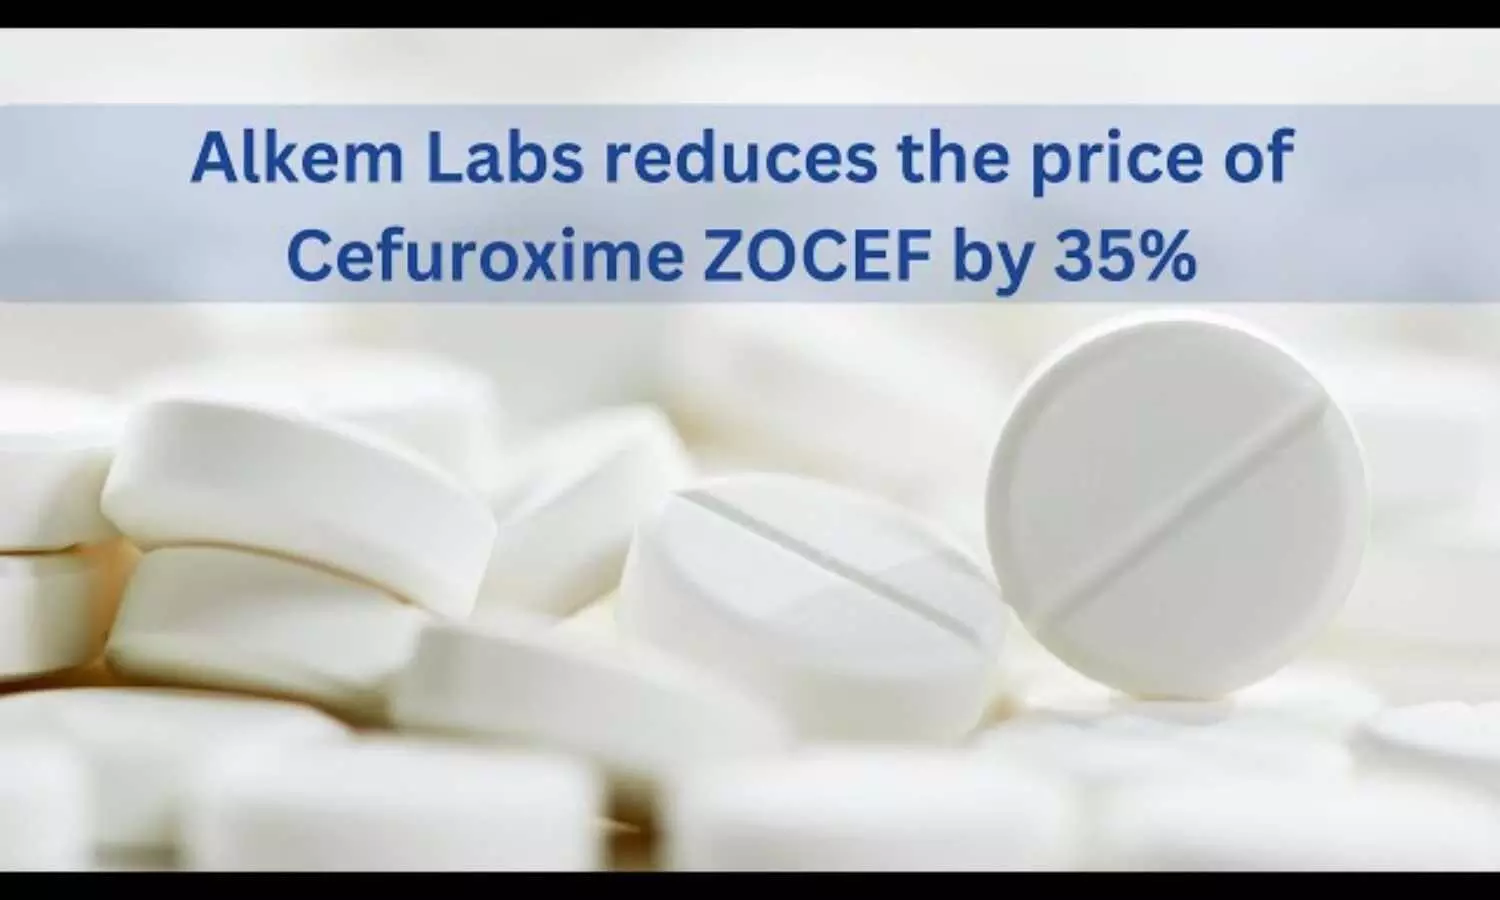 Alkem Laboratories reduces the price of Cefuroxime ZOCEF by 35 percent